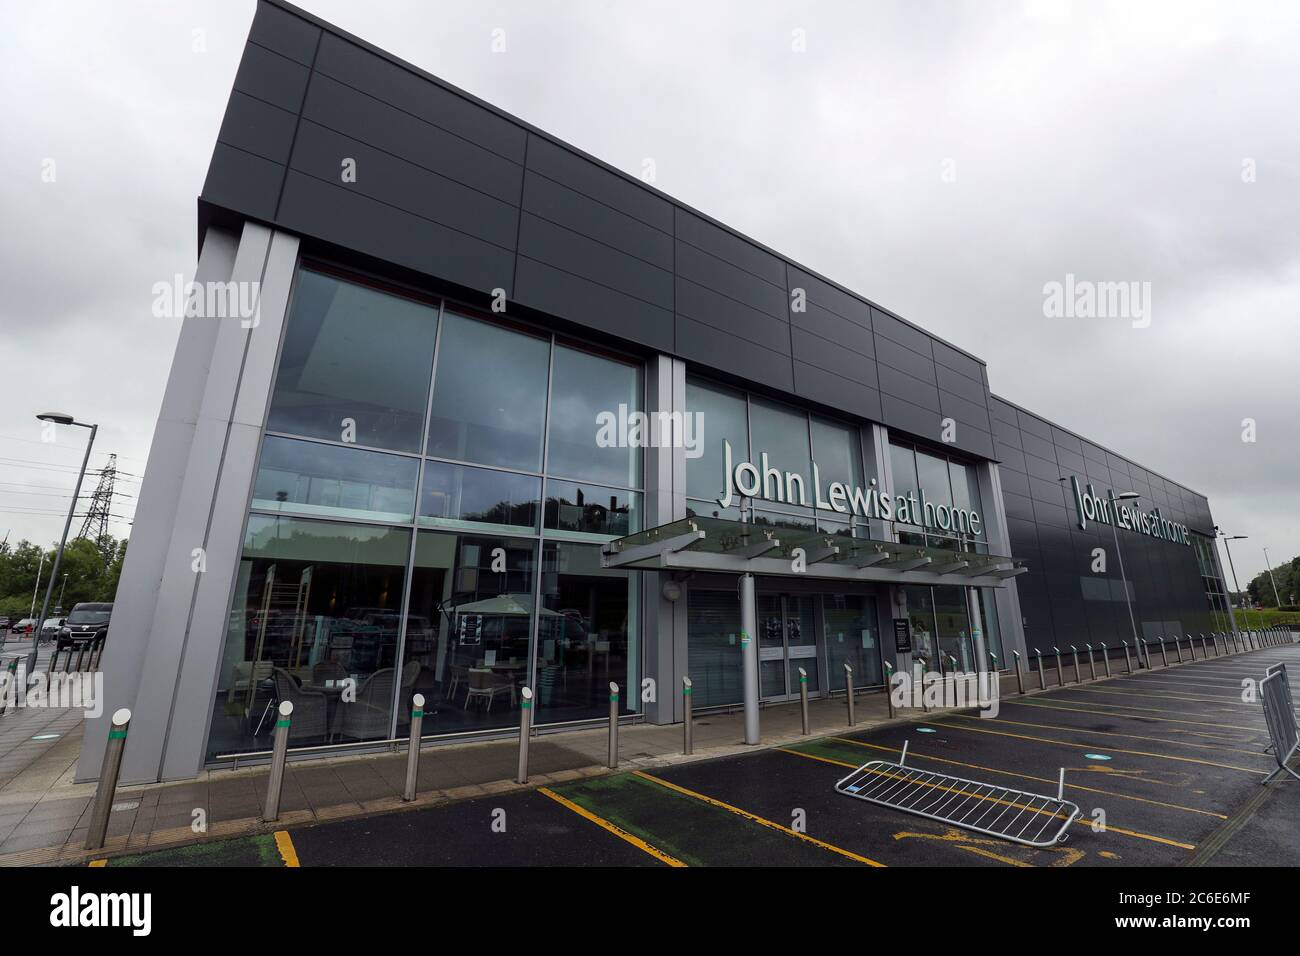 The John Lewis At Home store in Swindon which due to close as the John Lewis Partnership said it will shut two full-size department stores in Birmingham and Watford, four At Home shops in Croydon, Newbury, Swindon and Tamworth, as well as two travel hub outlets at Heathrow and St Pancras. Stock Photo